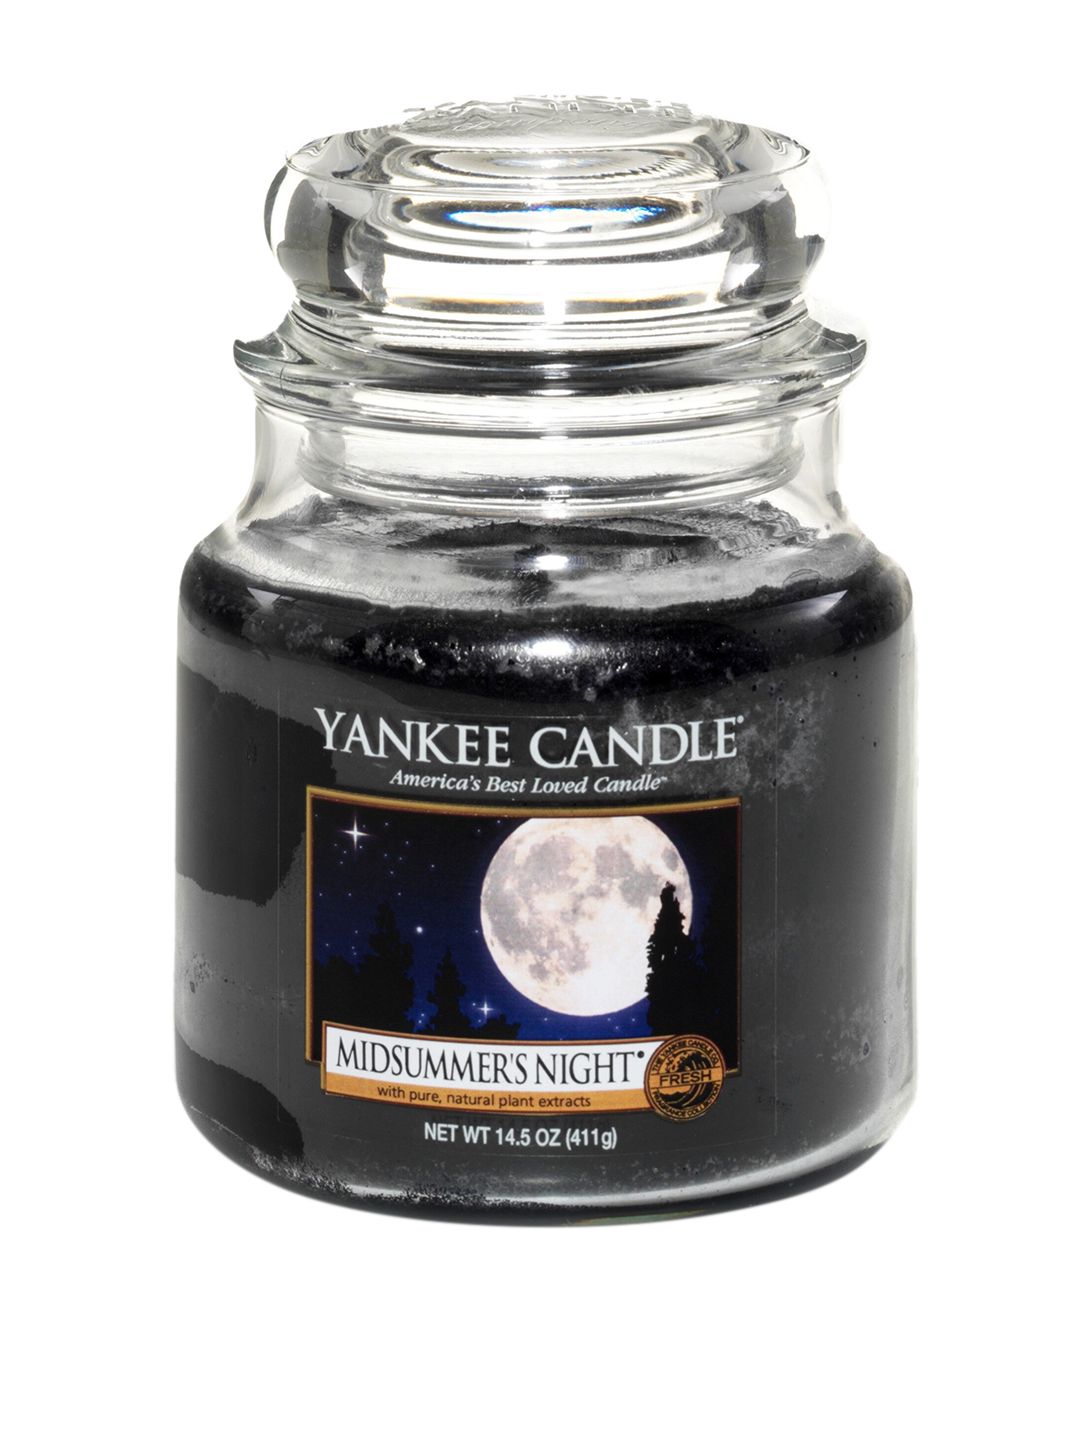 YANKEE CANDLE Black Classic Medium Jar Midsummer Night Scented Candles Price in India